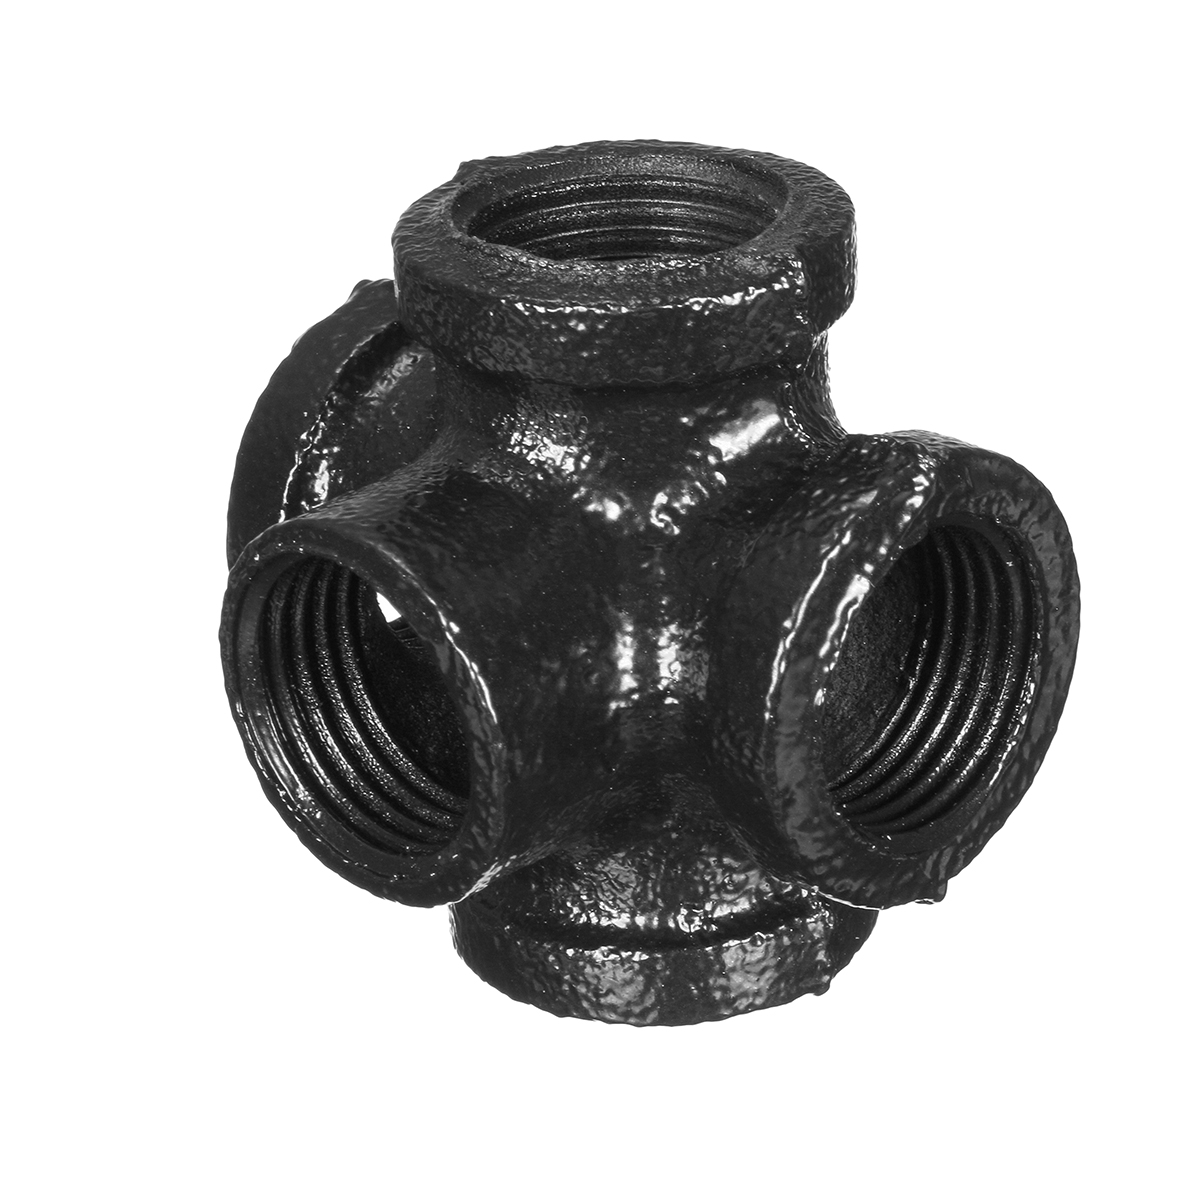 12-Inch-5-Way-Decorative-Industrial-Pipes-Fittings-Wall-Rack-Furniture-Bookshevles-1299954